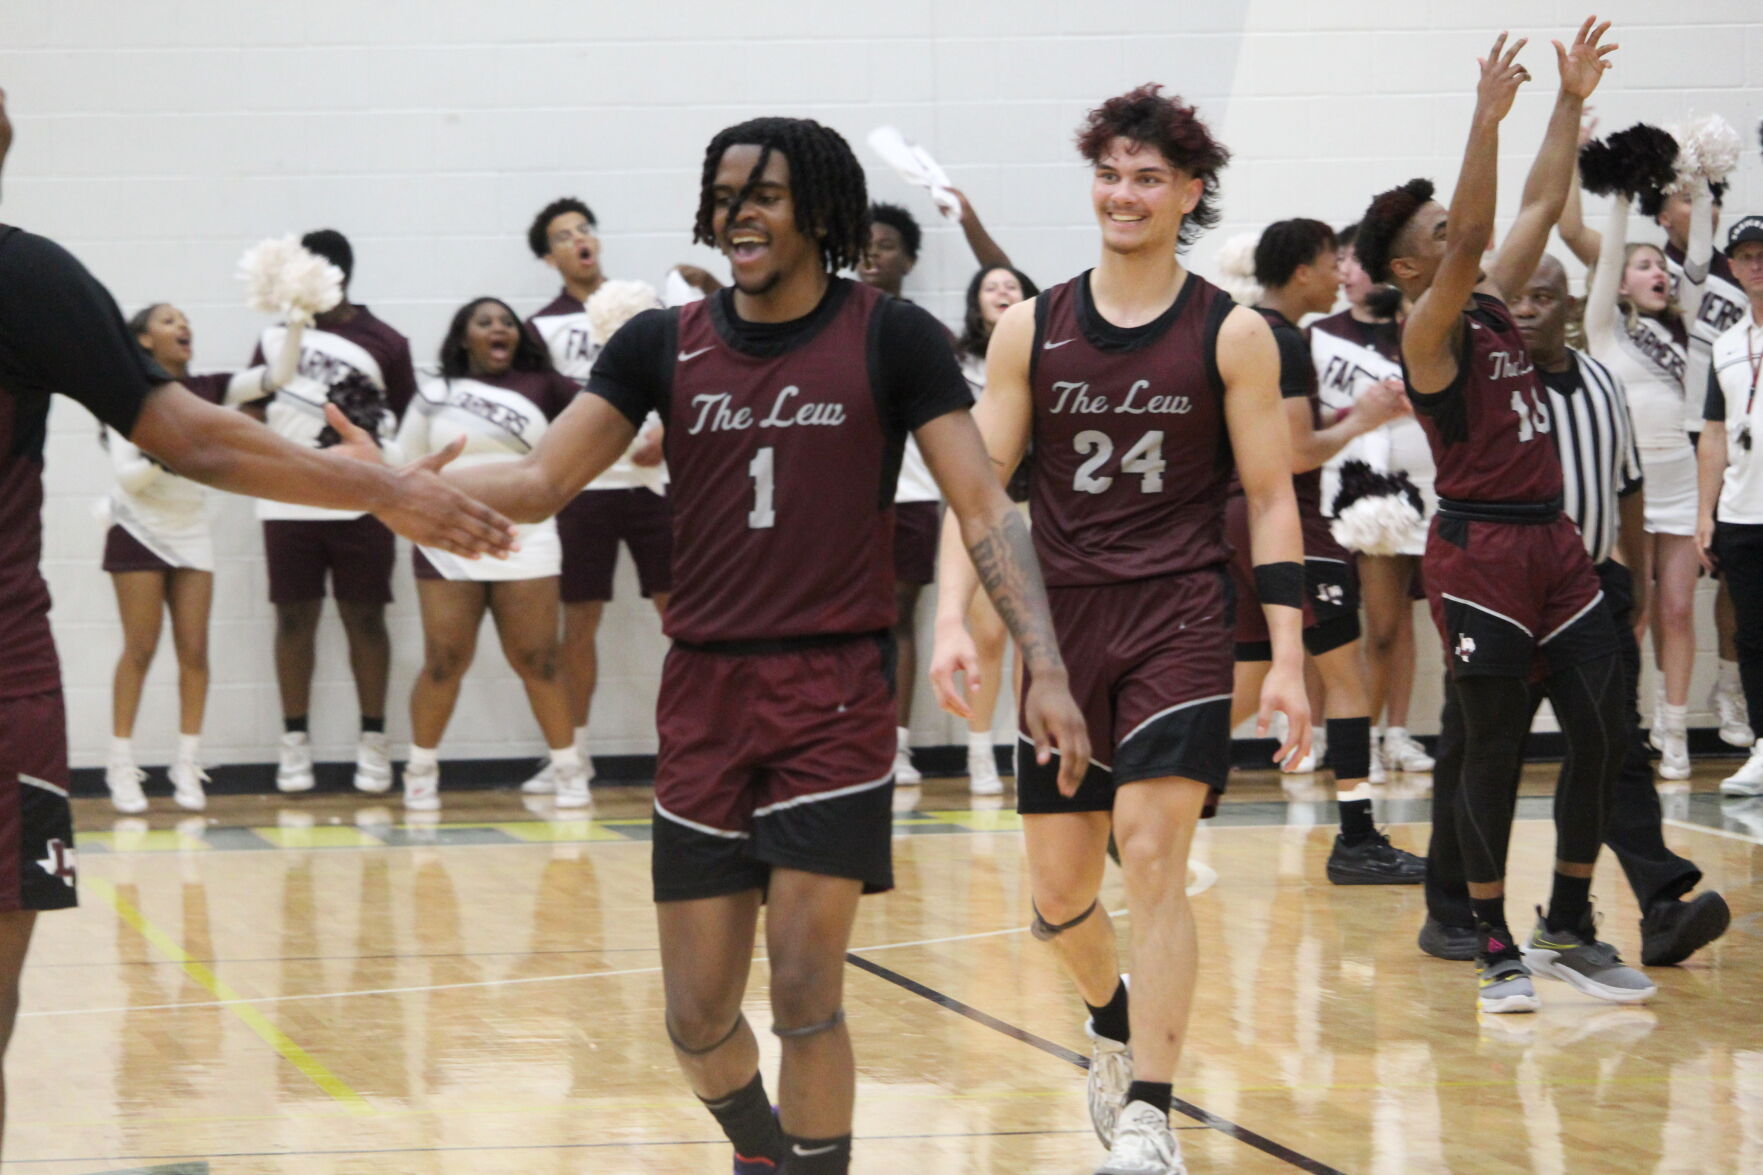 Lewisville Boys Basketball Team Clinches Regional Tournament Spot in Thrilling Victory